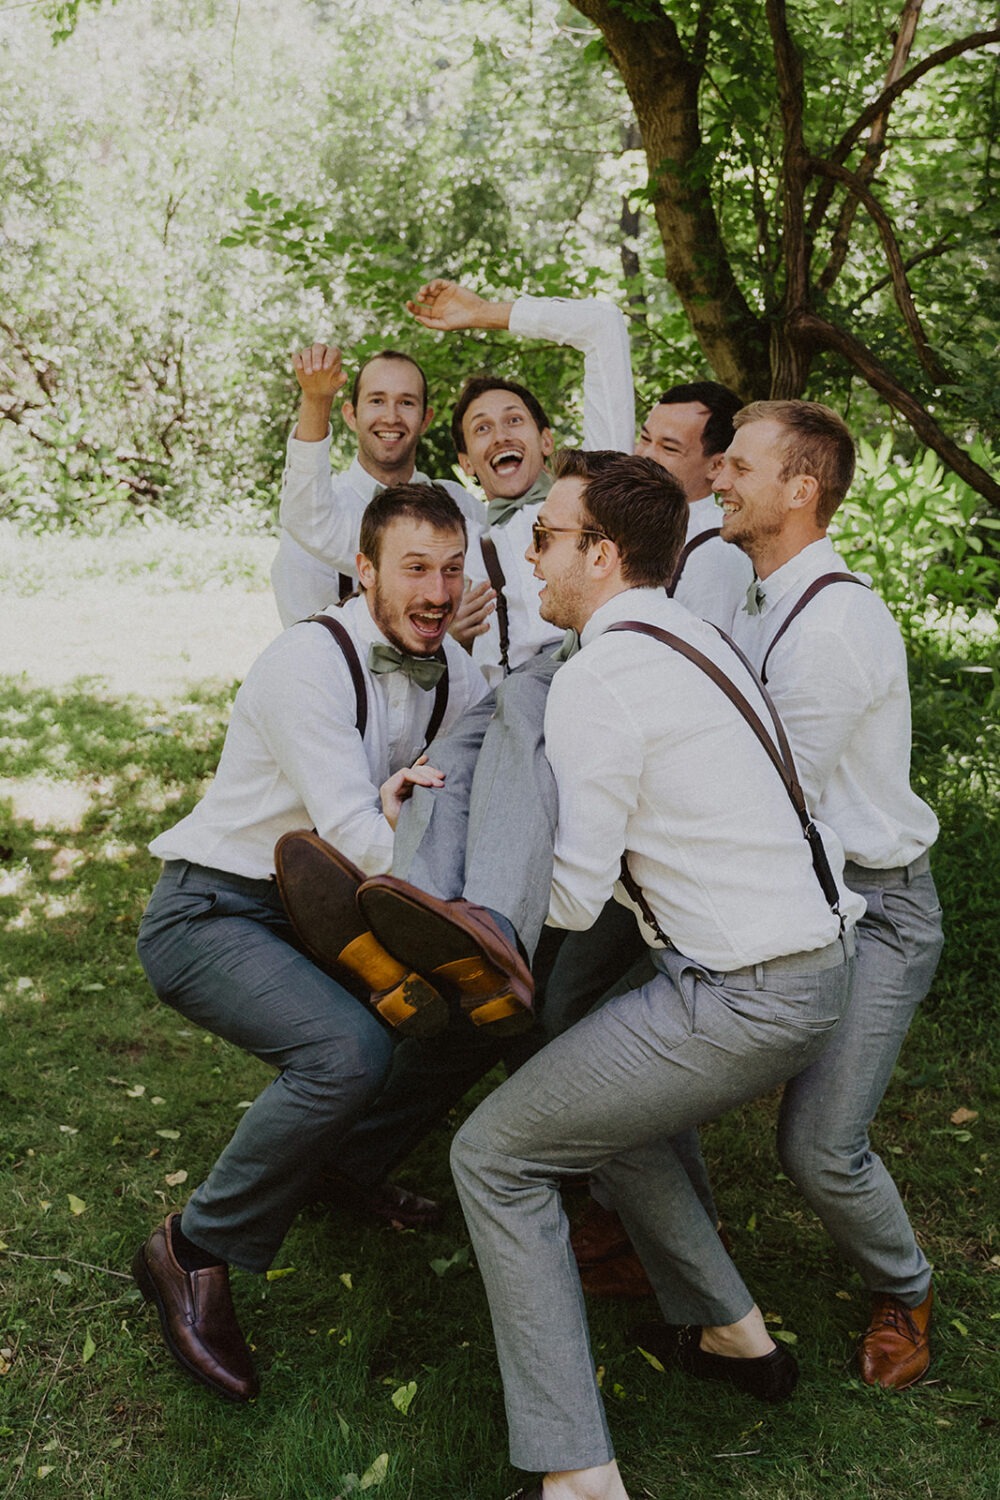 groomsmen throw groom up into the air pulling from barn wedding ideas 